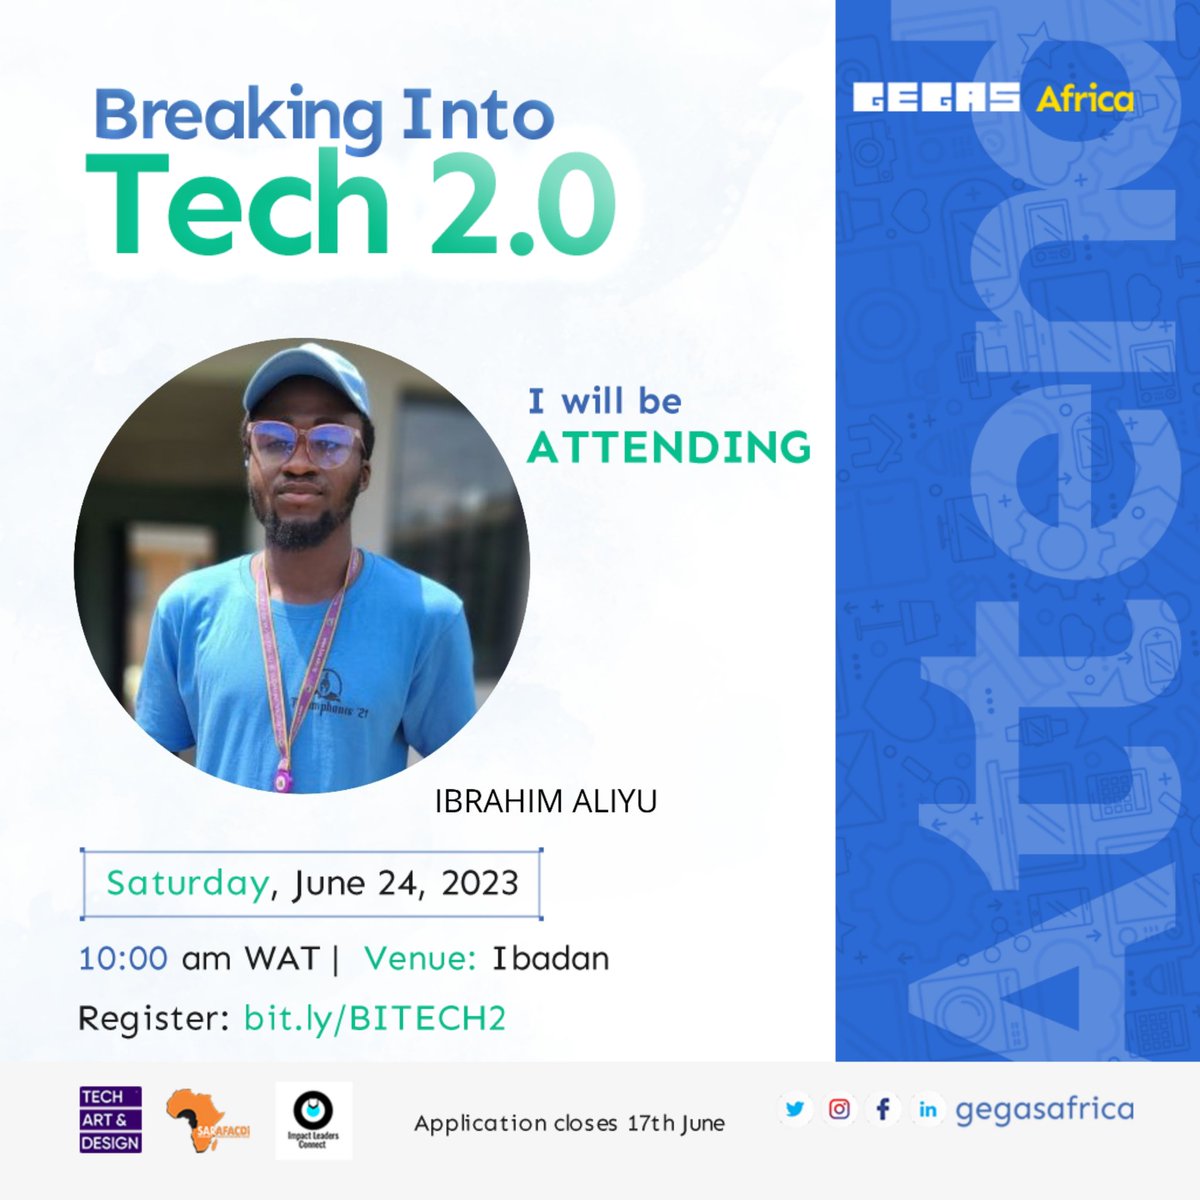 I'm privilege to be among the selected few that'll be attending Breaking  Into Tech 2.0 @gegasafrica 

#BIT2_0
#Breakingintotech
#Gegasafrica
#empowerment
#decentWork
#economicGrowth
#sdg4
#sdg8